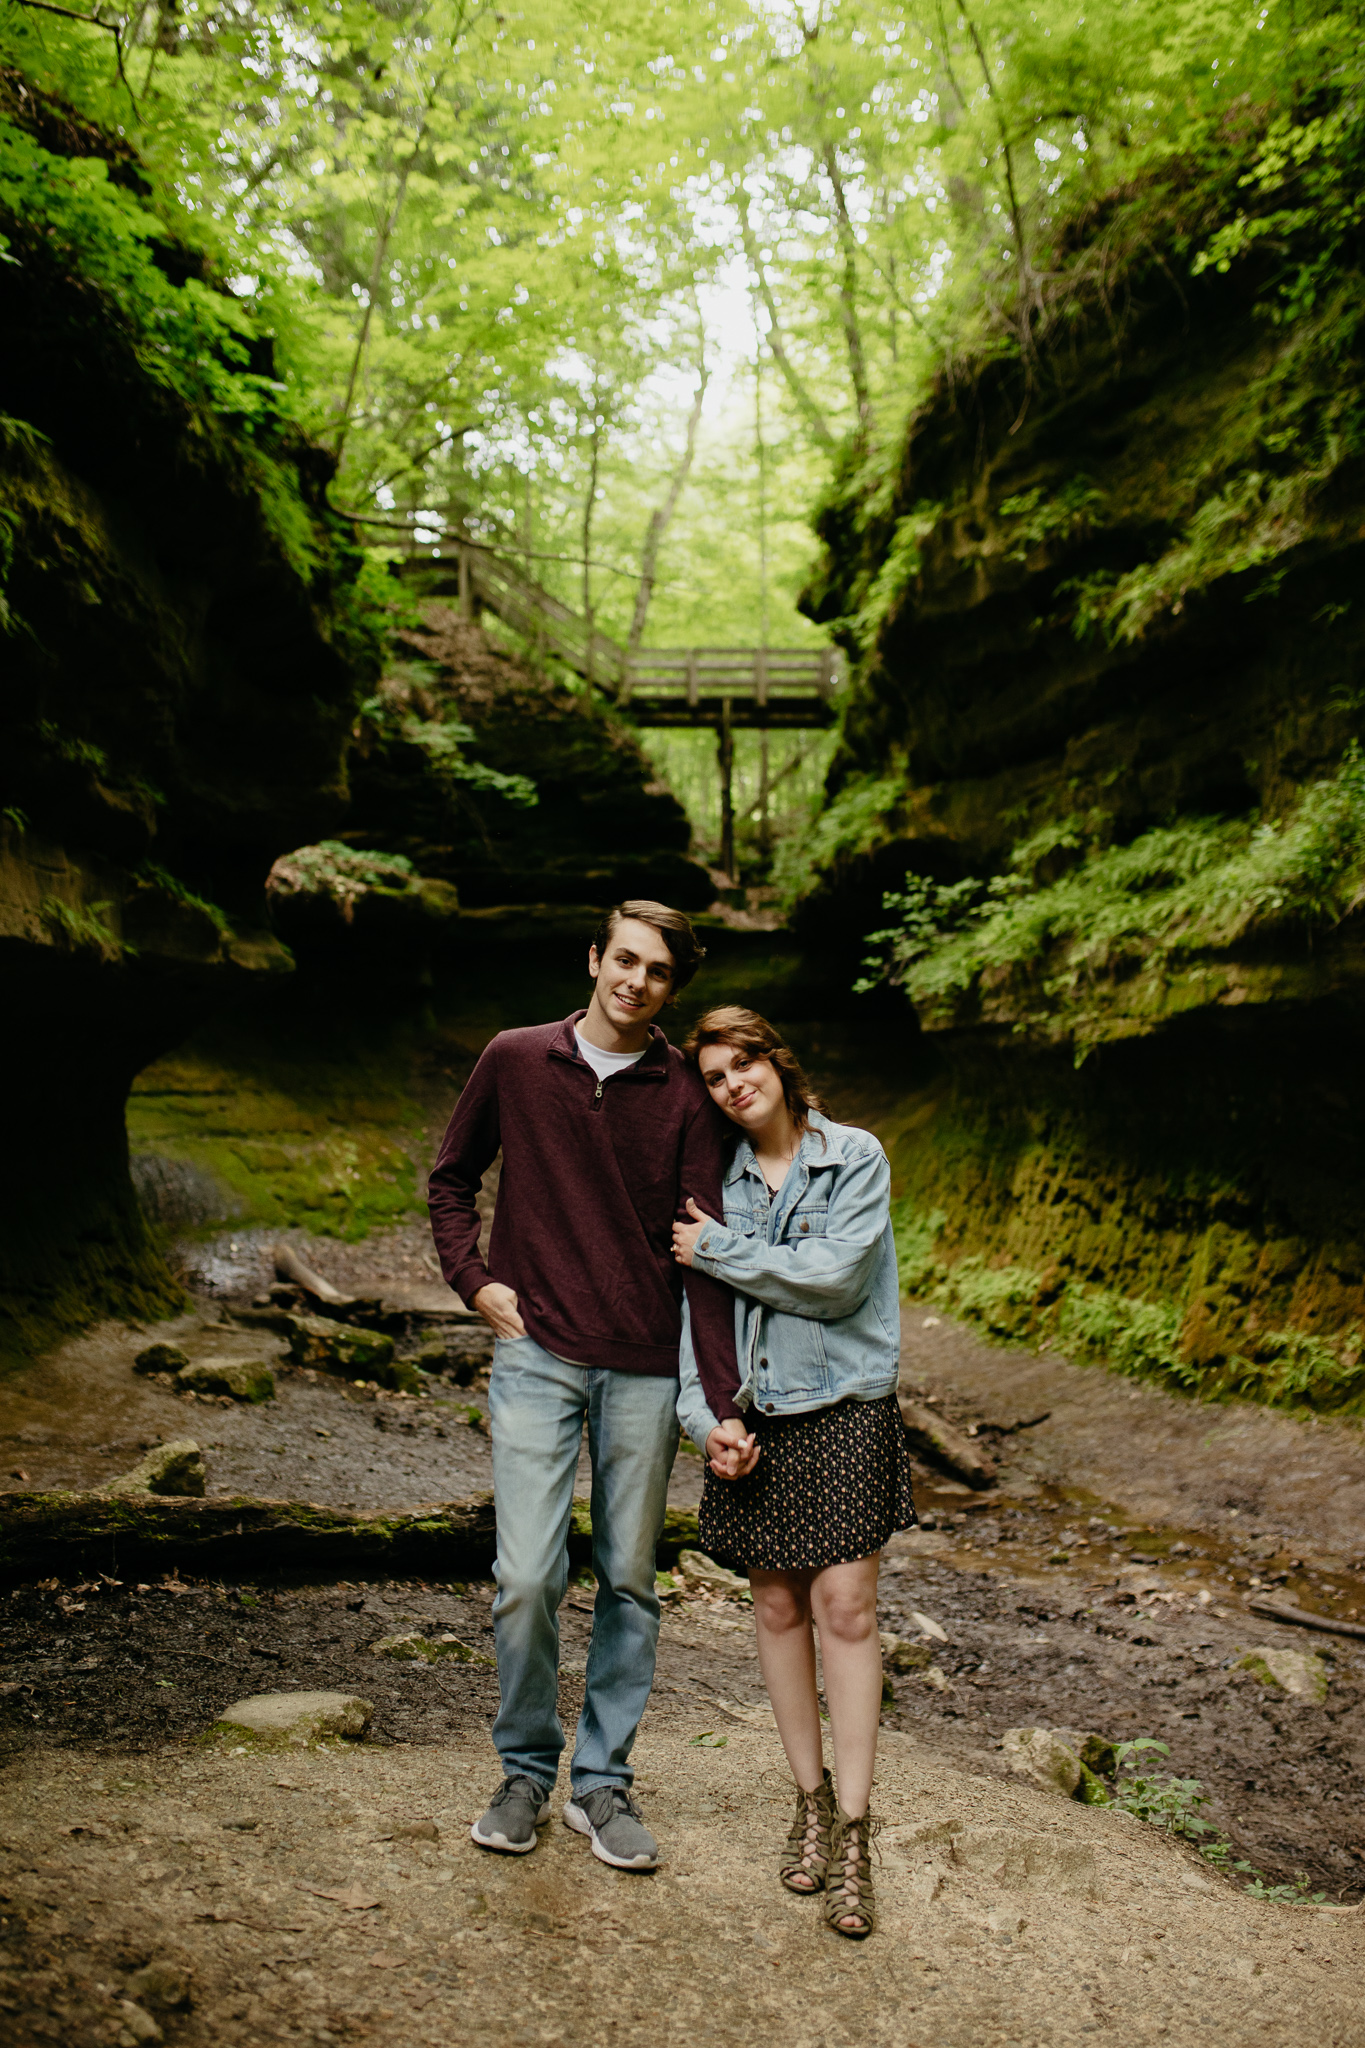 Summer Morning Engagement Session at Shades State Park